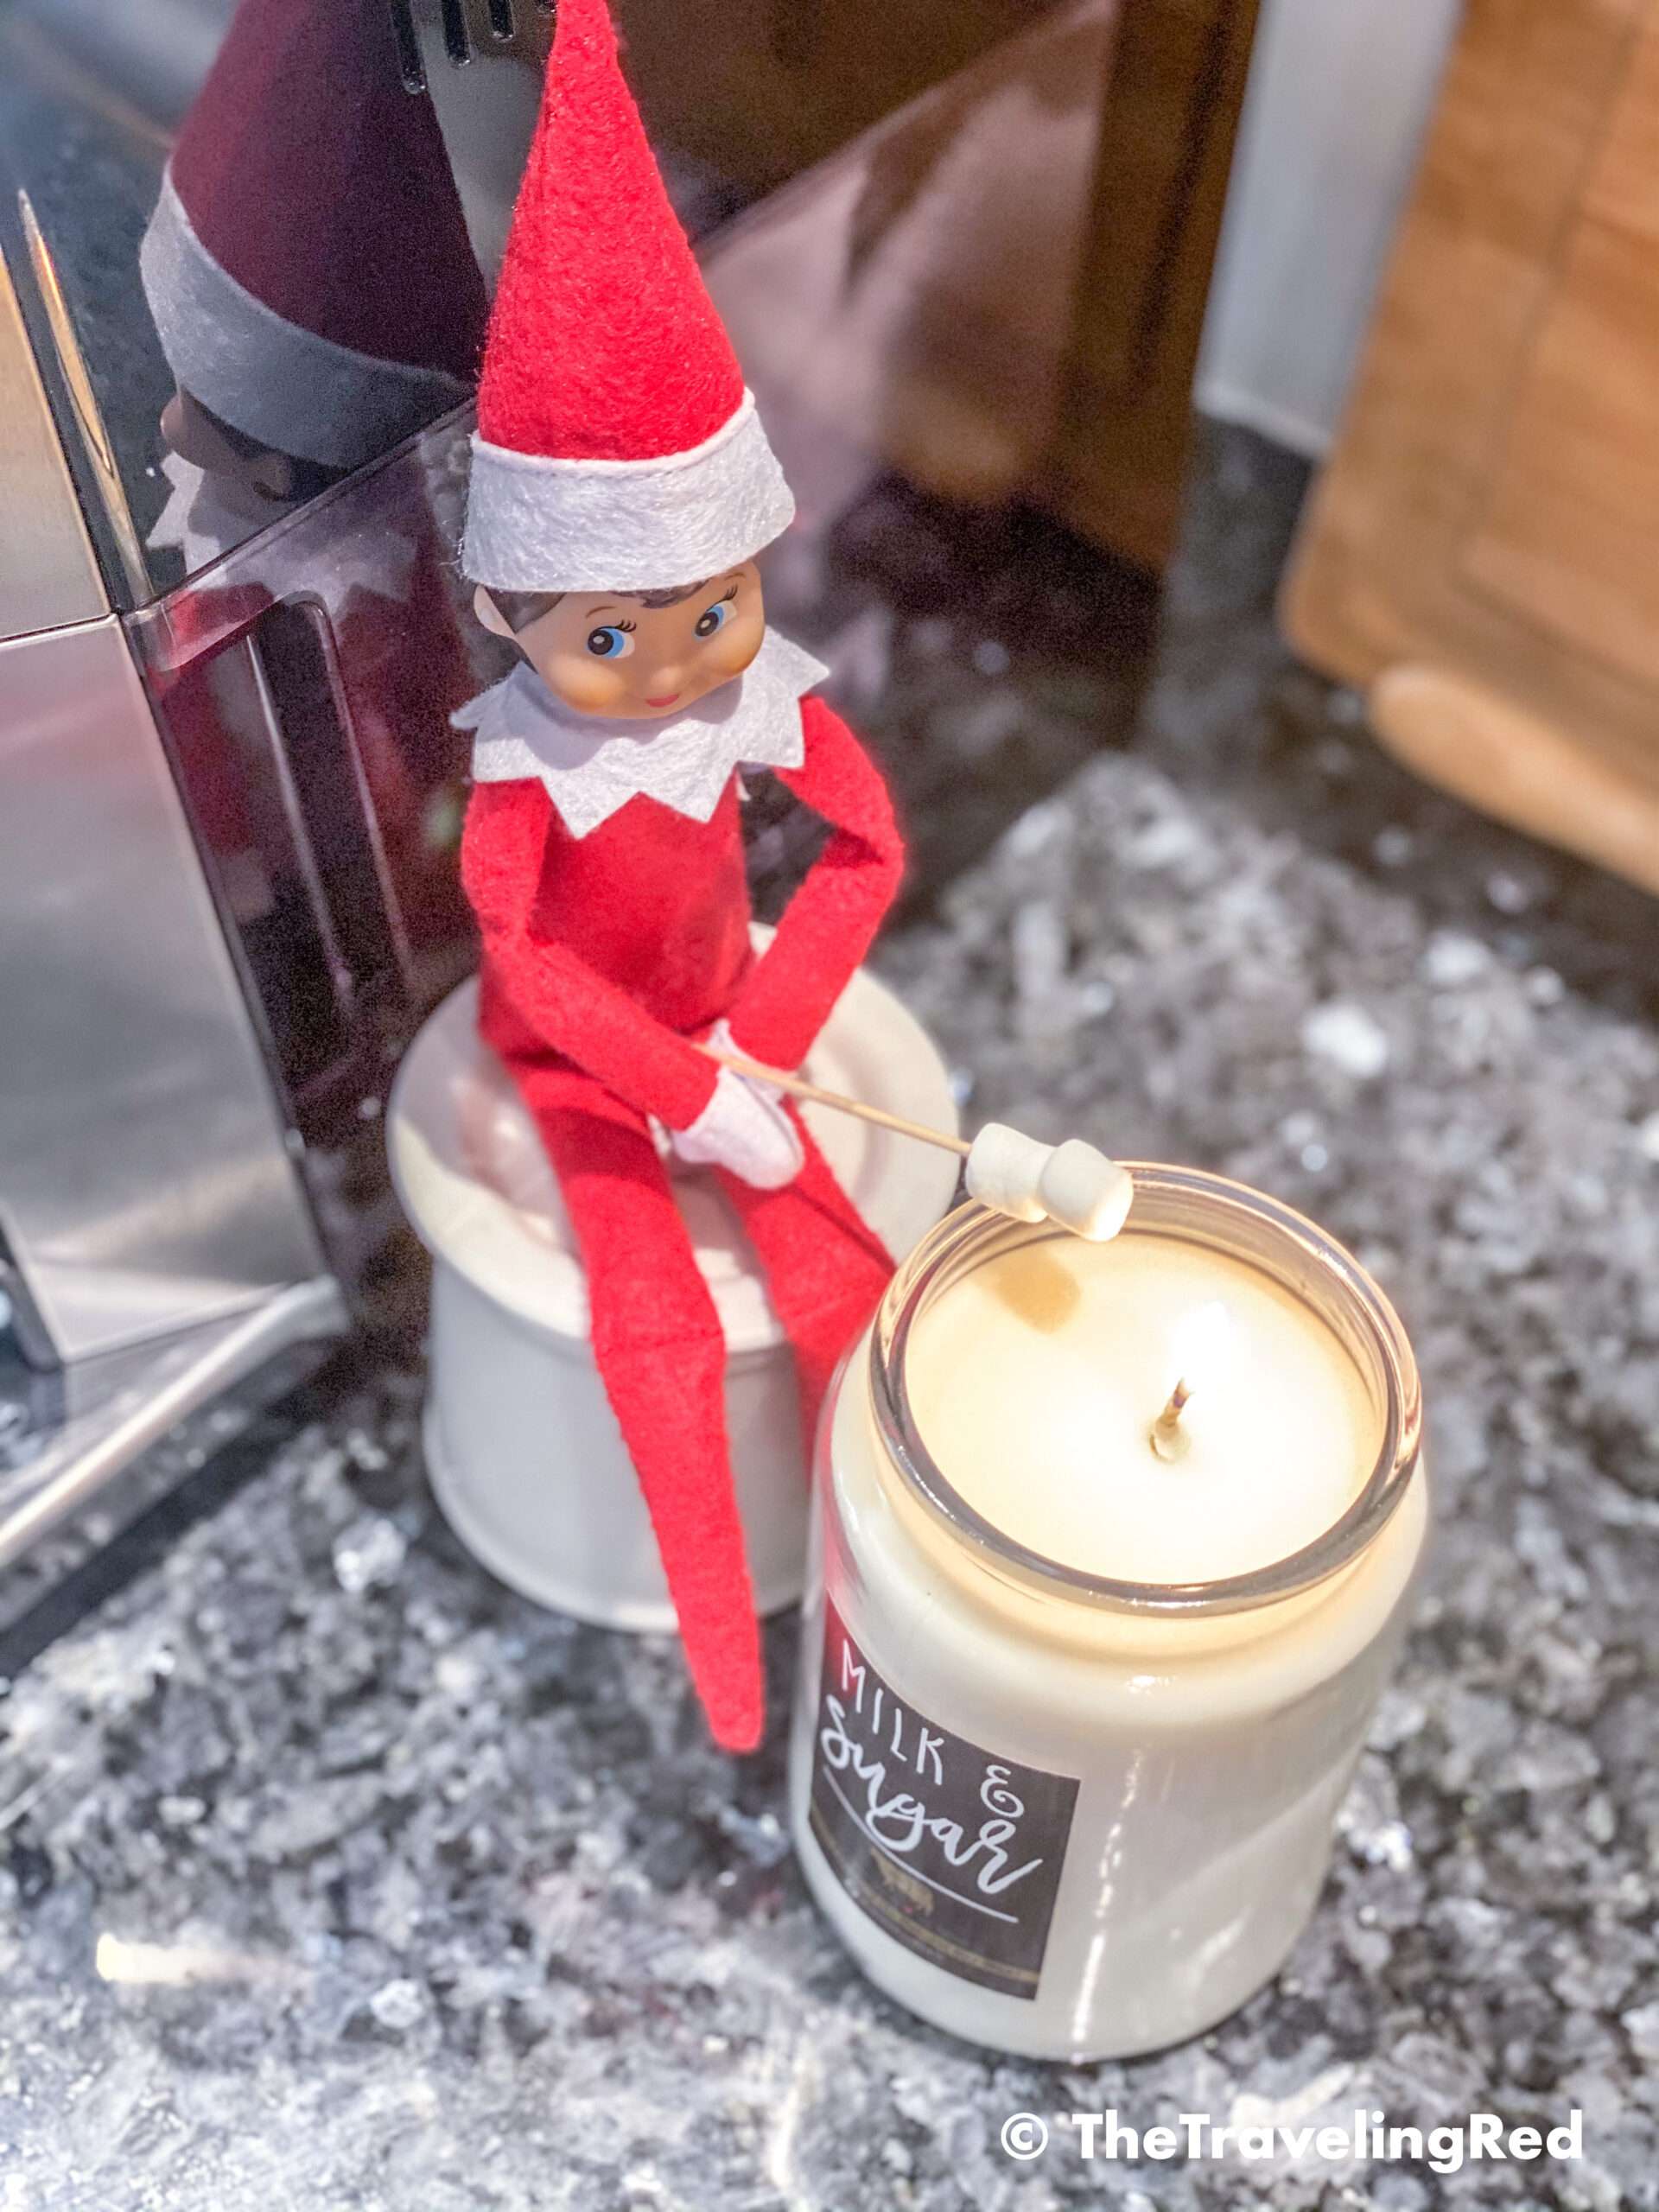 Naughty Elf on the shelf making s'mores using mini marshmallows and a candle. Fun and easy elf on the shelf ideas for a naughty elf that are quick and easy using things you have at home.